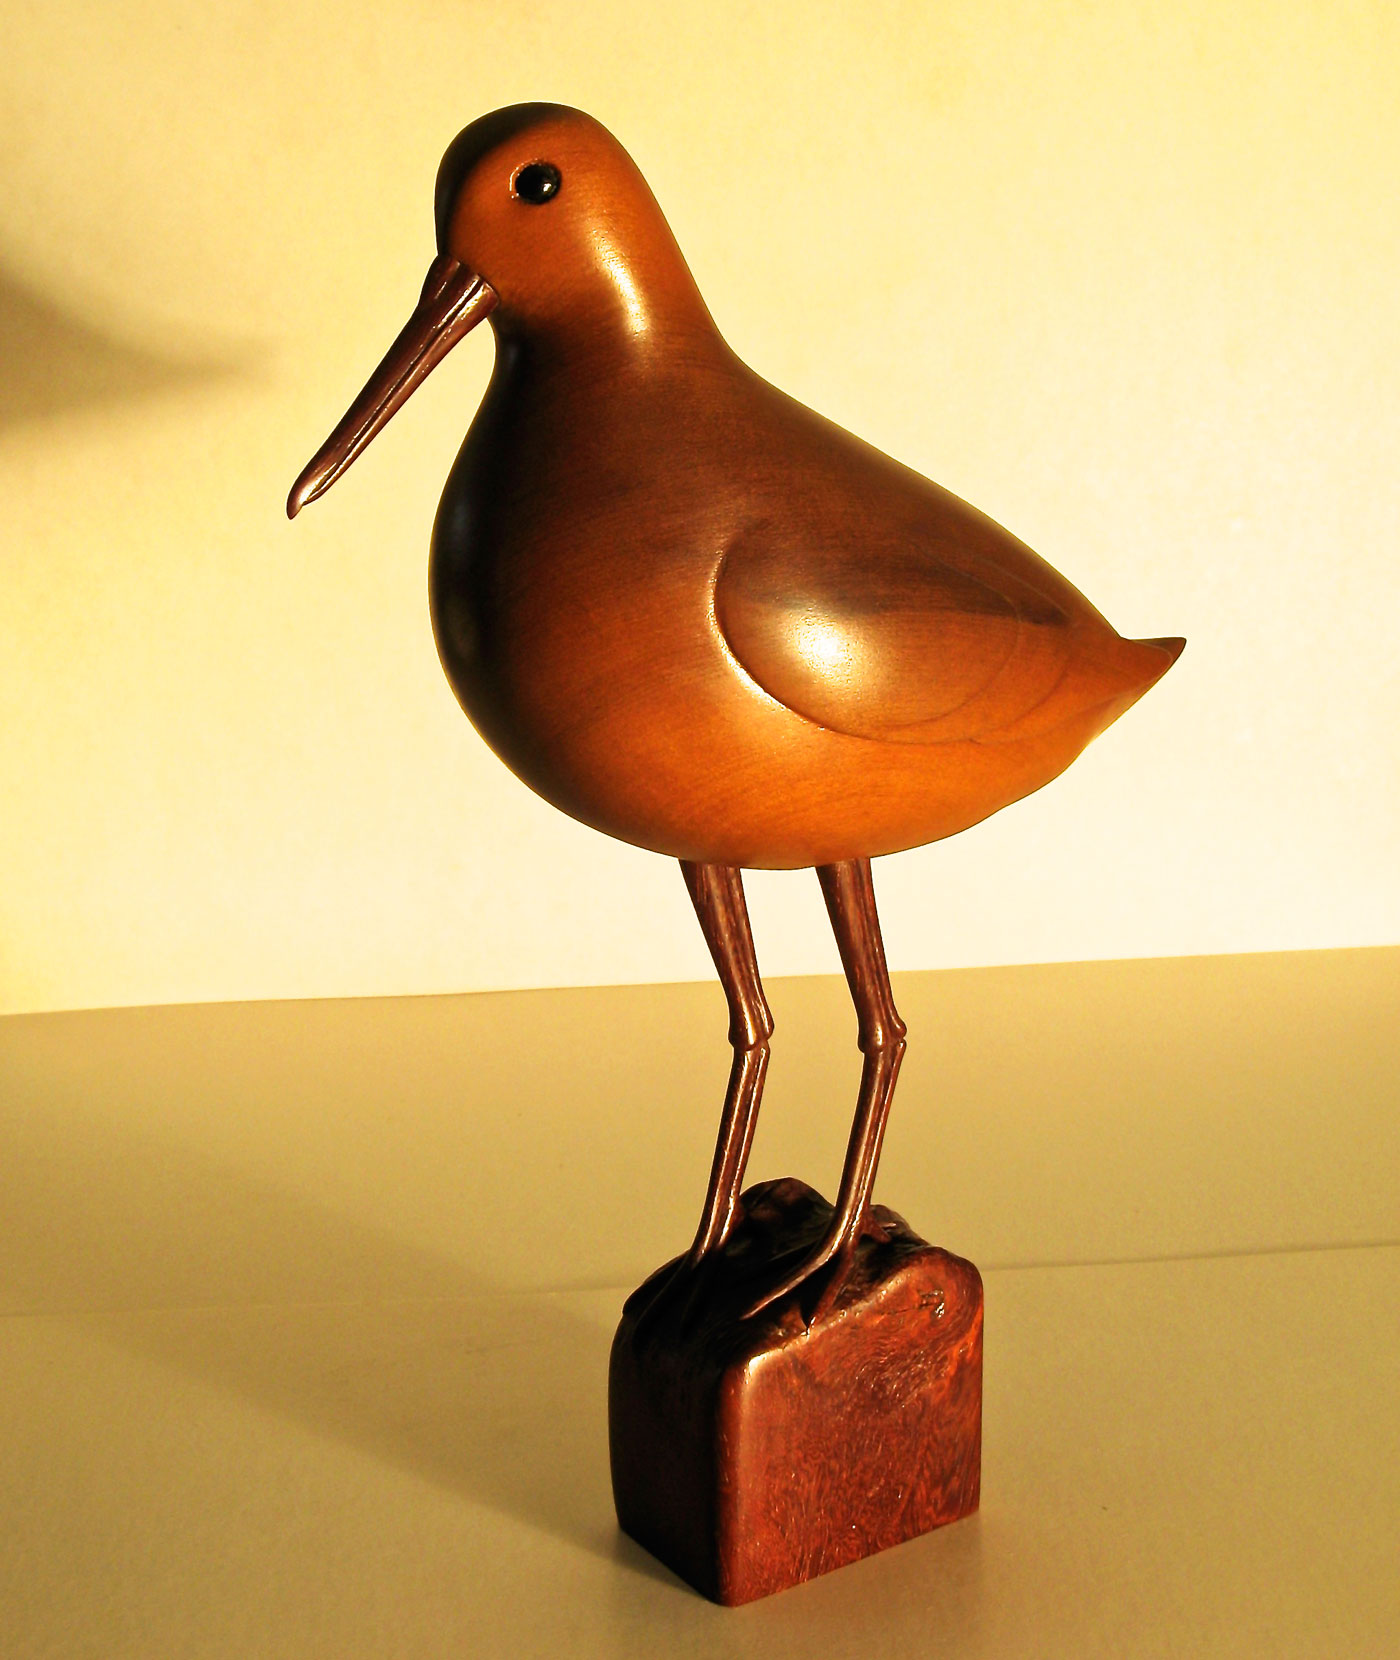 American Dowitcher - wood carving sculpture